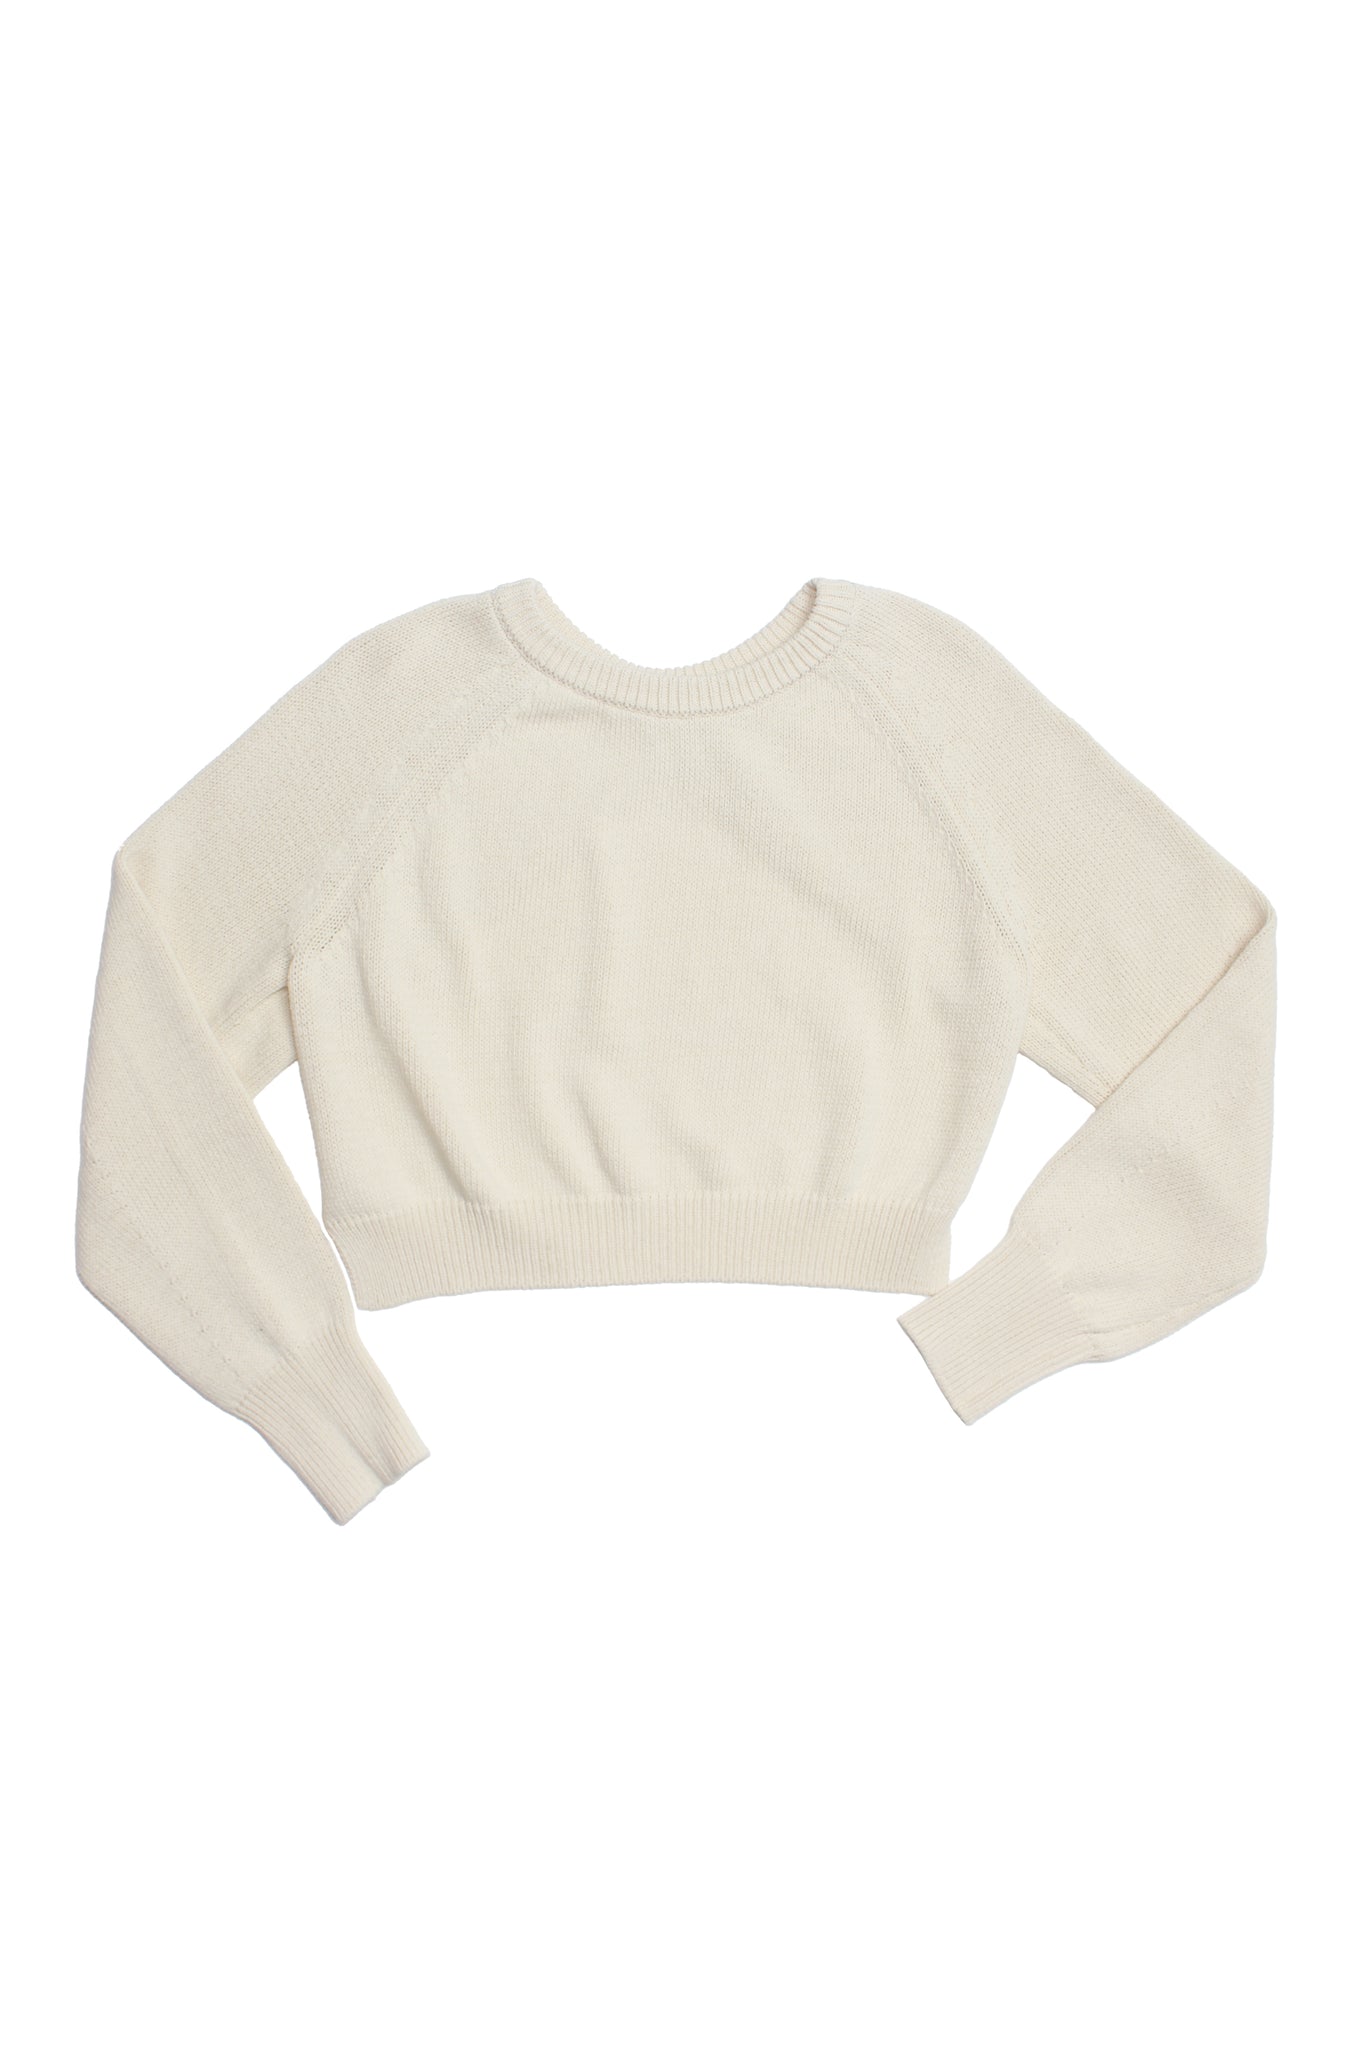 Two way knit top in Off white